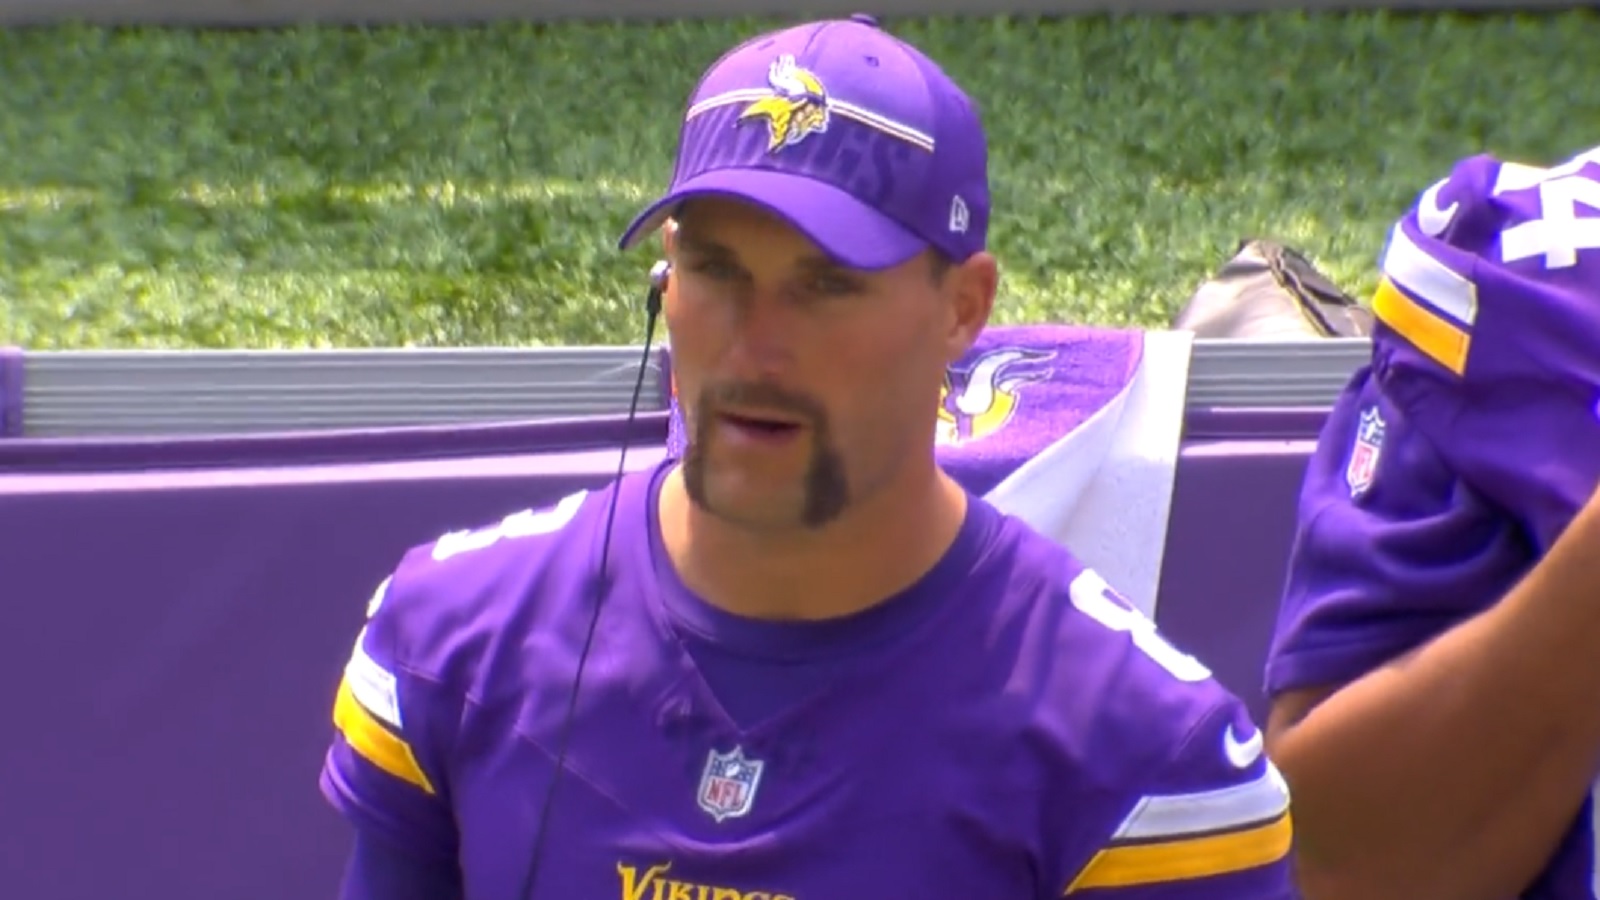 Everyone said the same thing about Kirk Cousins new look